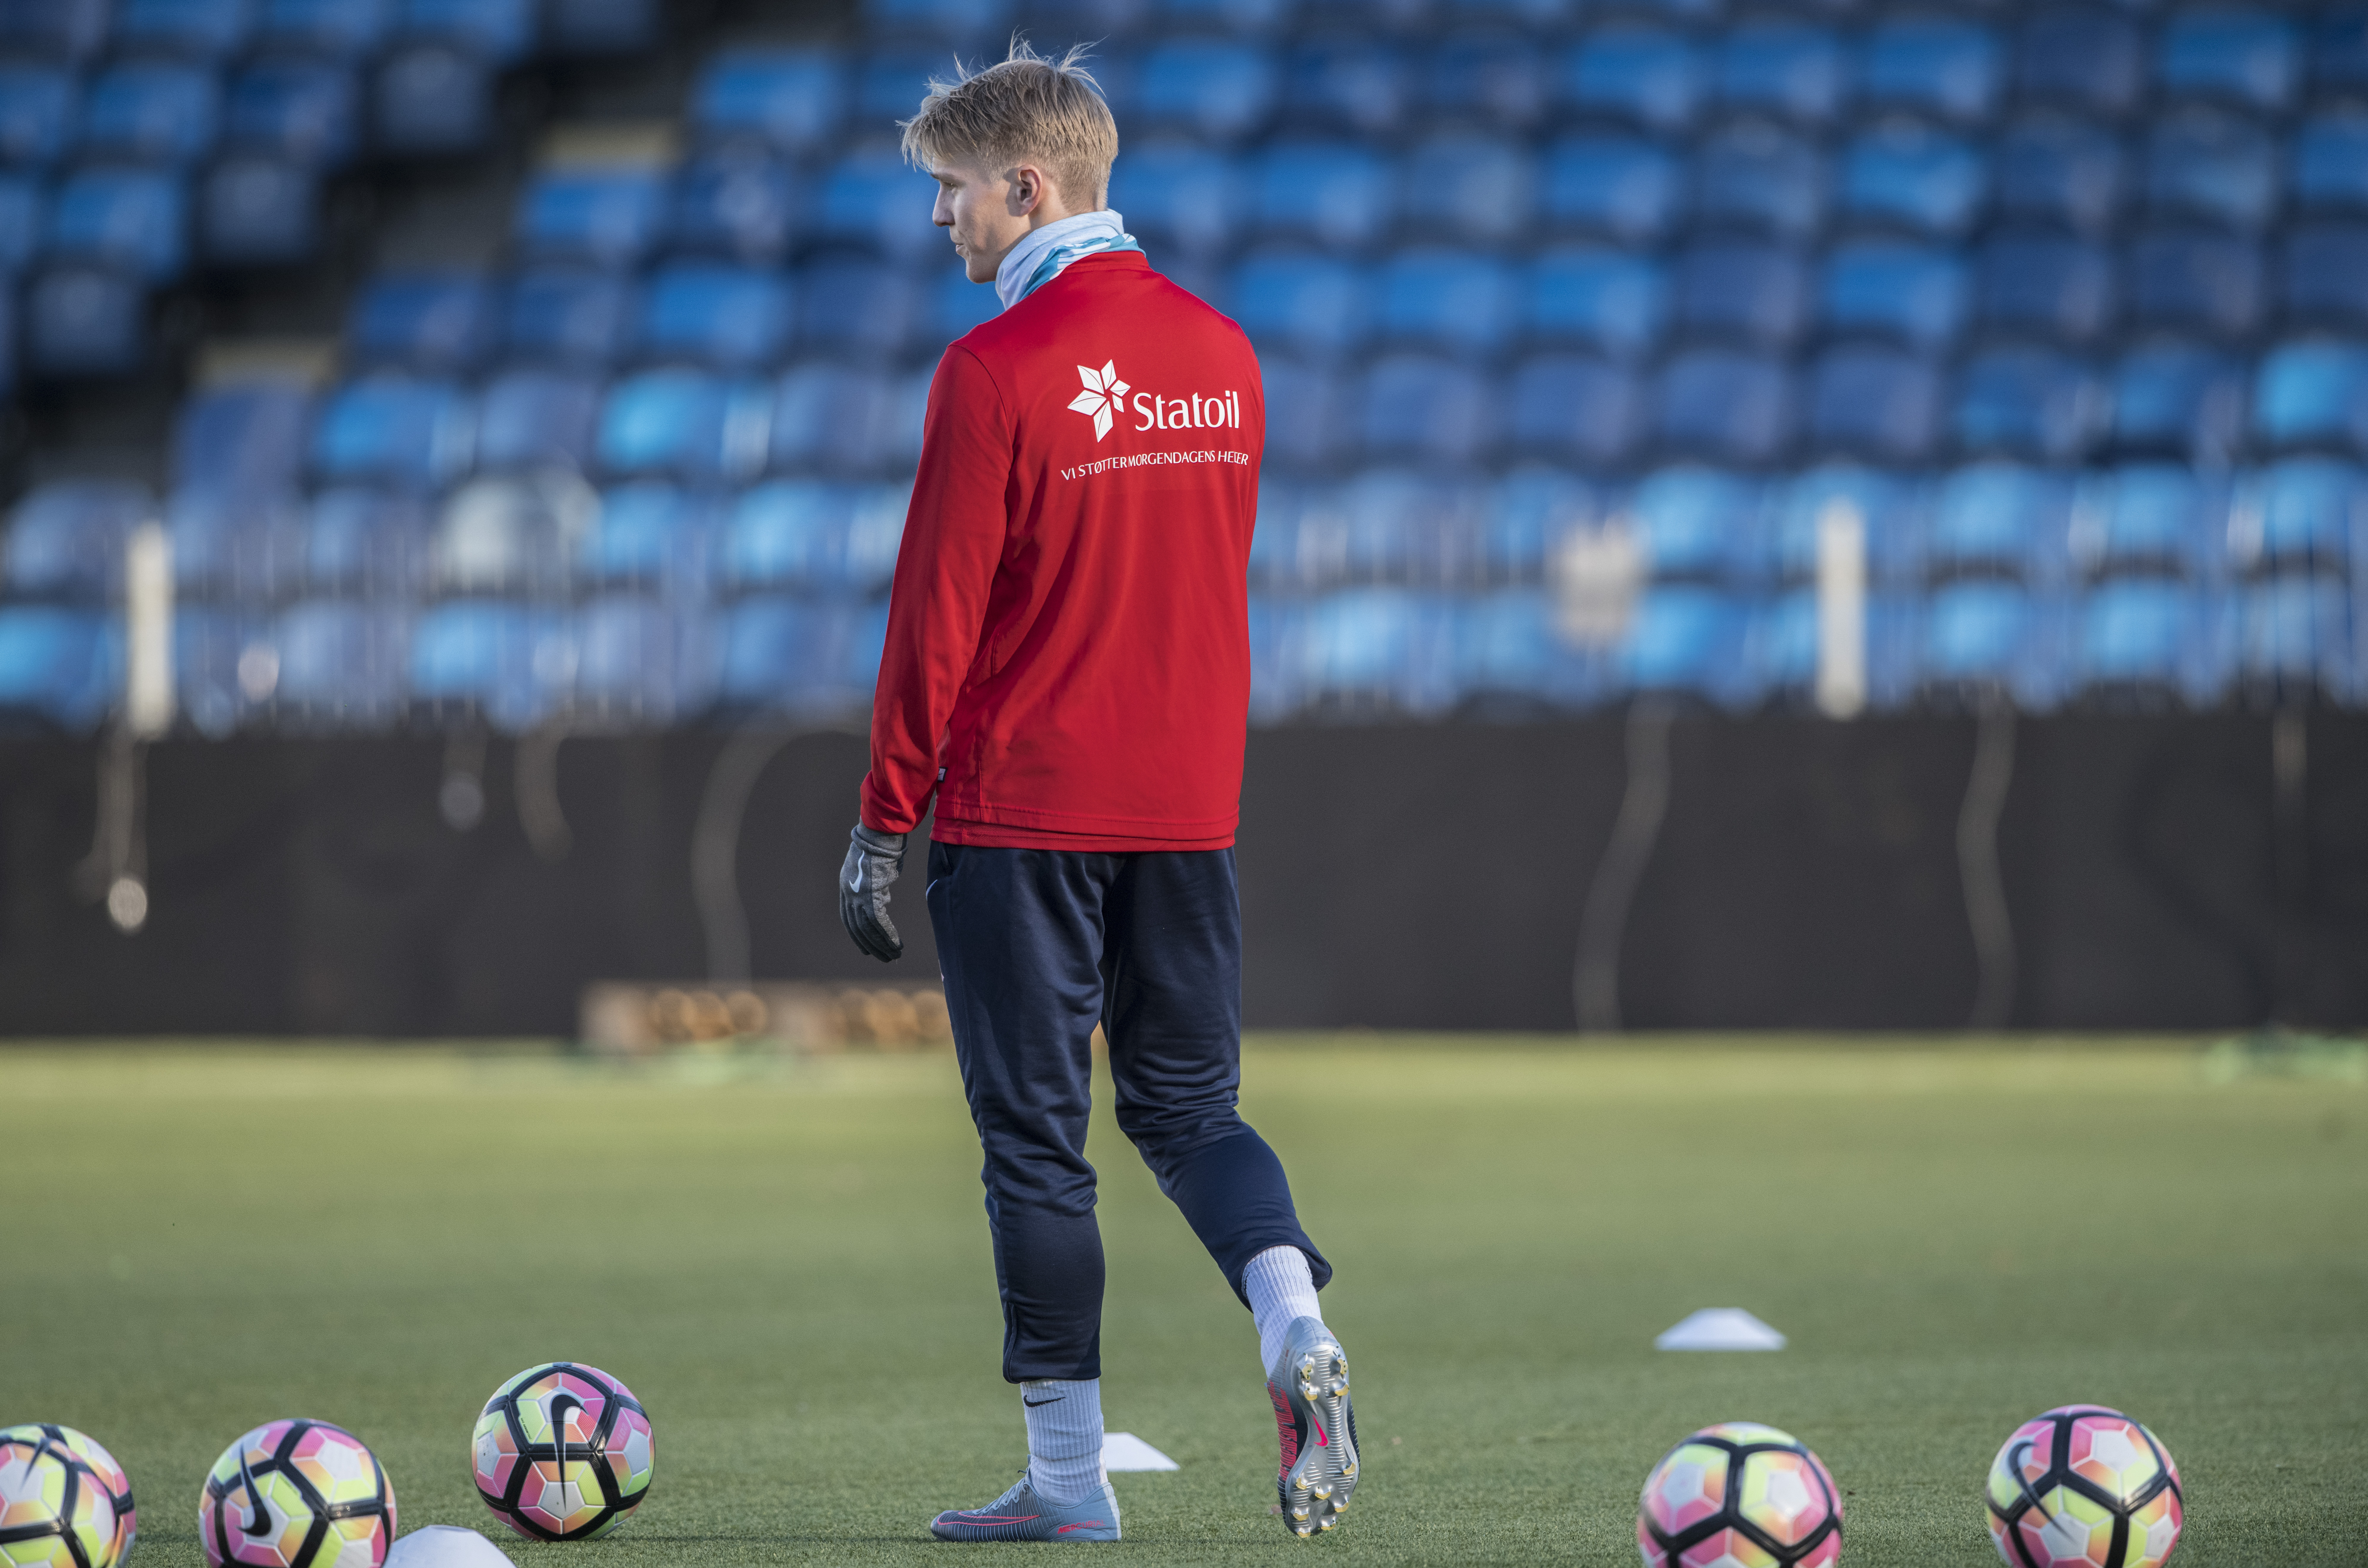 DRAMMEN, NORWAY - OCTOBER 09: Martin Odegaard of Norway during training at Marienlyst Stadion  on October 9, 2017 in Drammen, Norway. (Photo by Trond Tandberg/Getty Images)